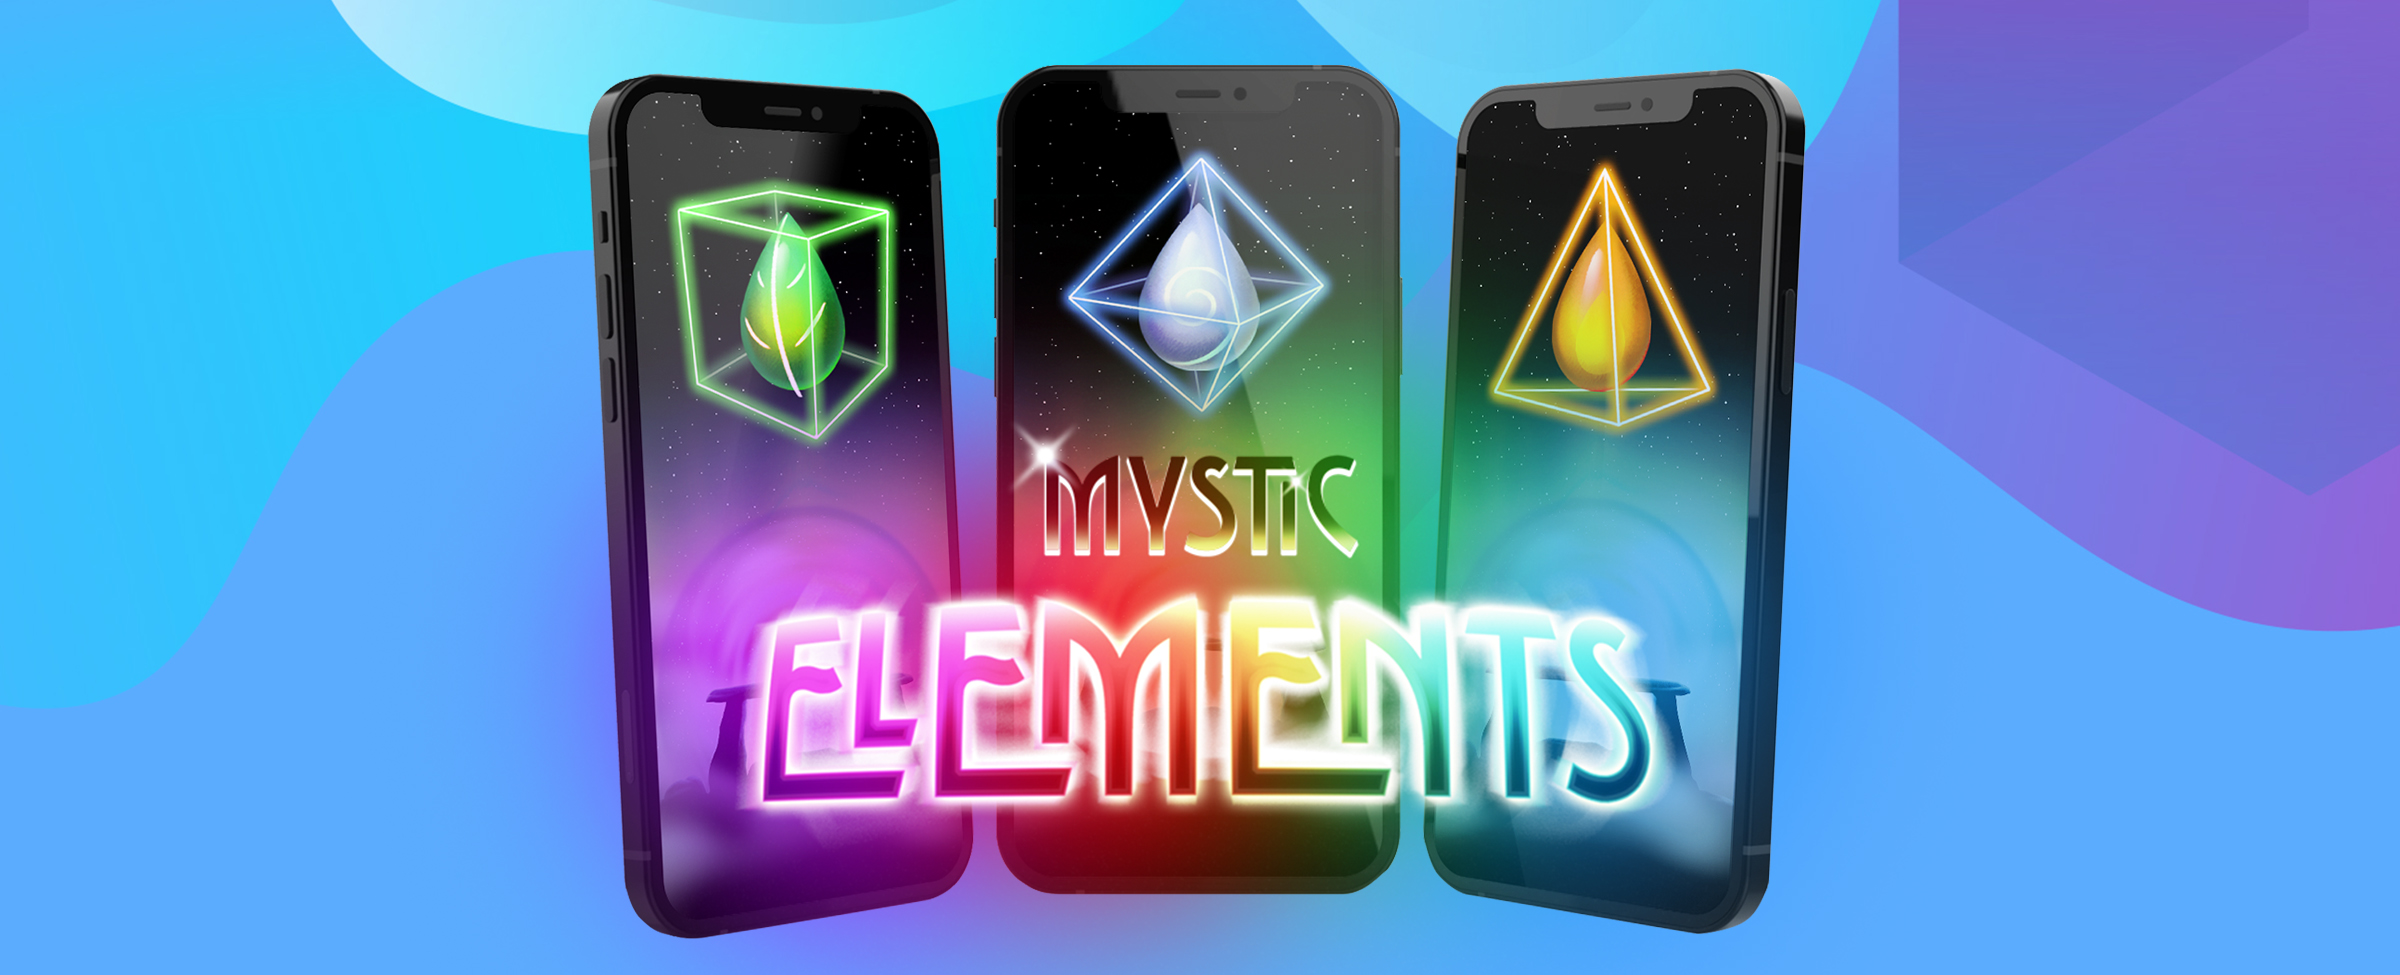 Unlock the mysteries of the cosmos for free when you play Mystic Elements at SlotsLV. The mystery symbol awaits you – try it today!